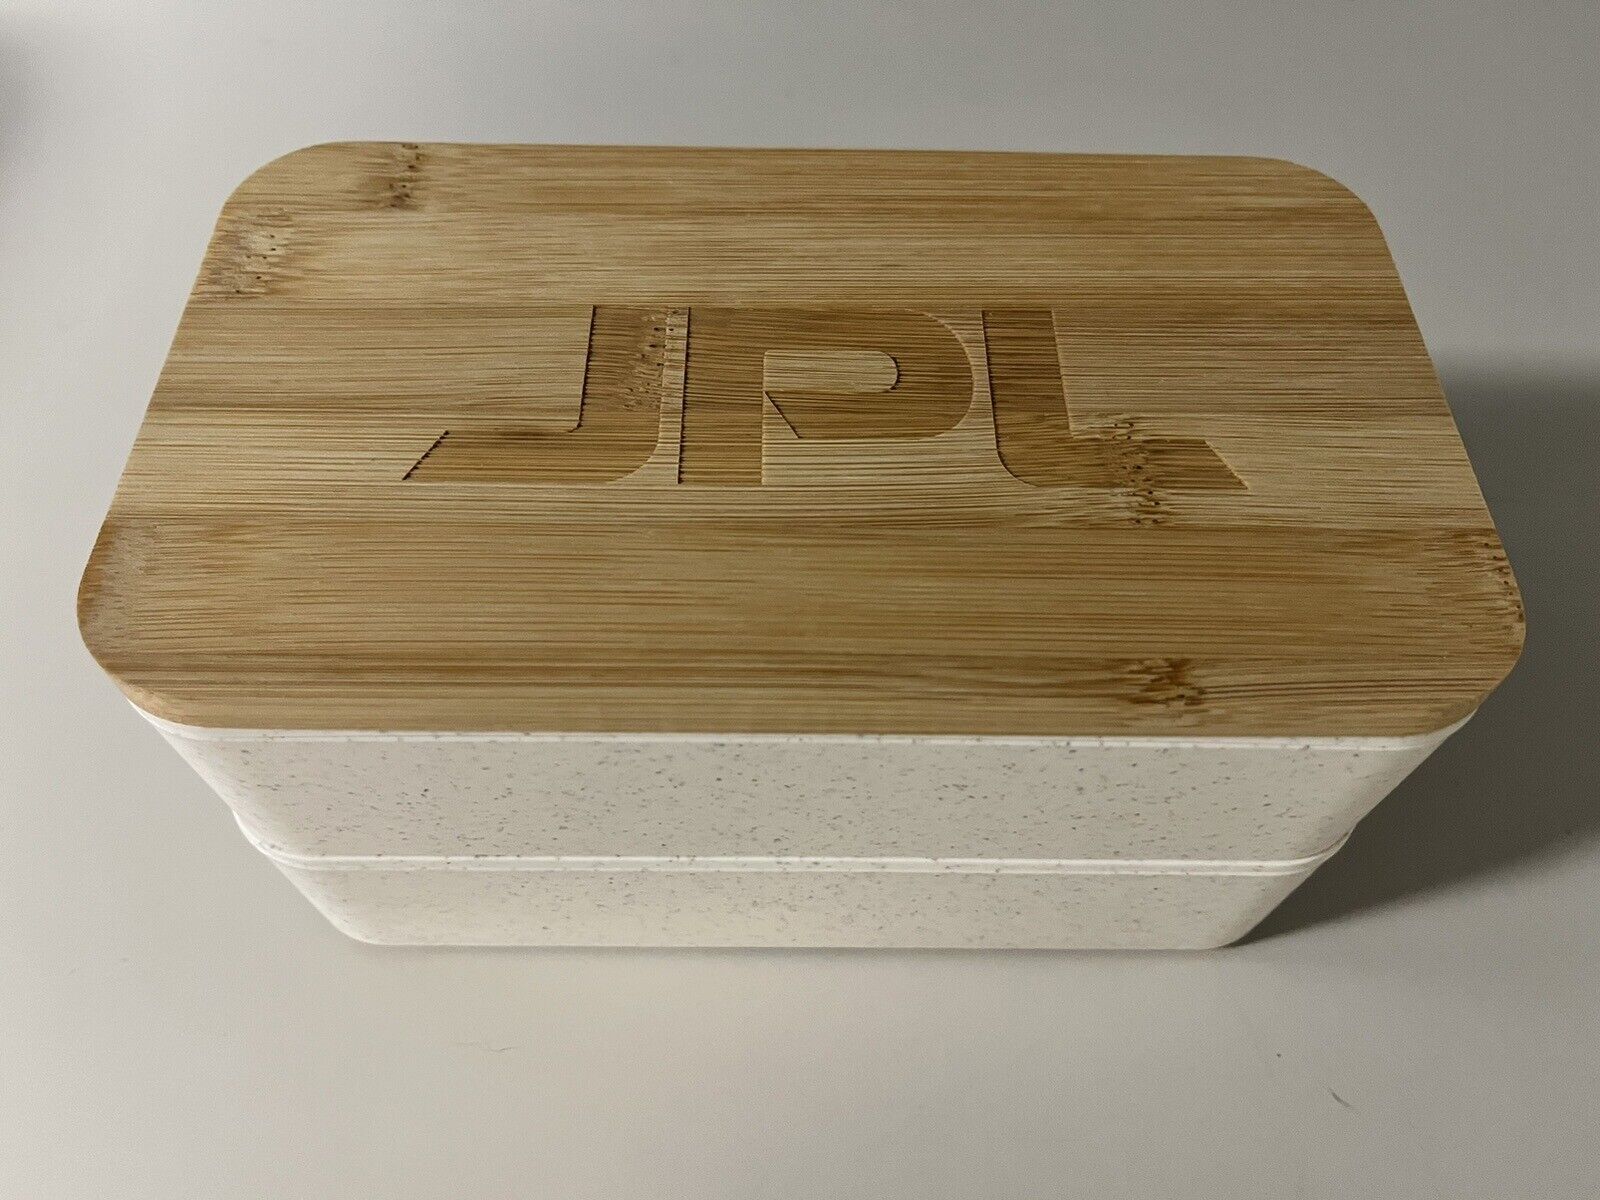 JPL-NASA White Wooden Engraved Top Bento Lunch Box - New